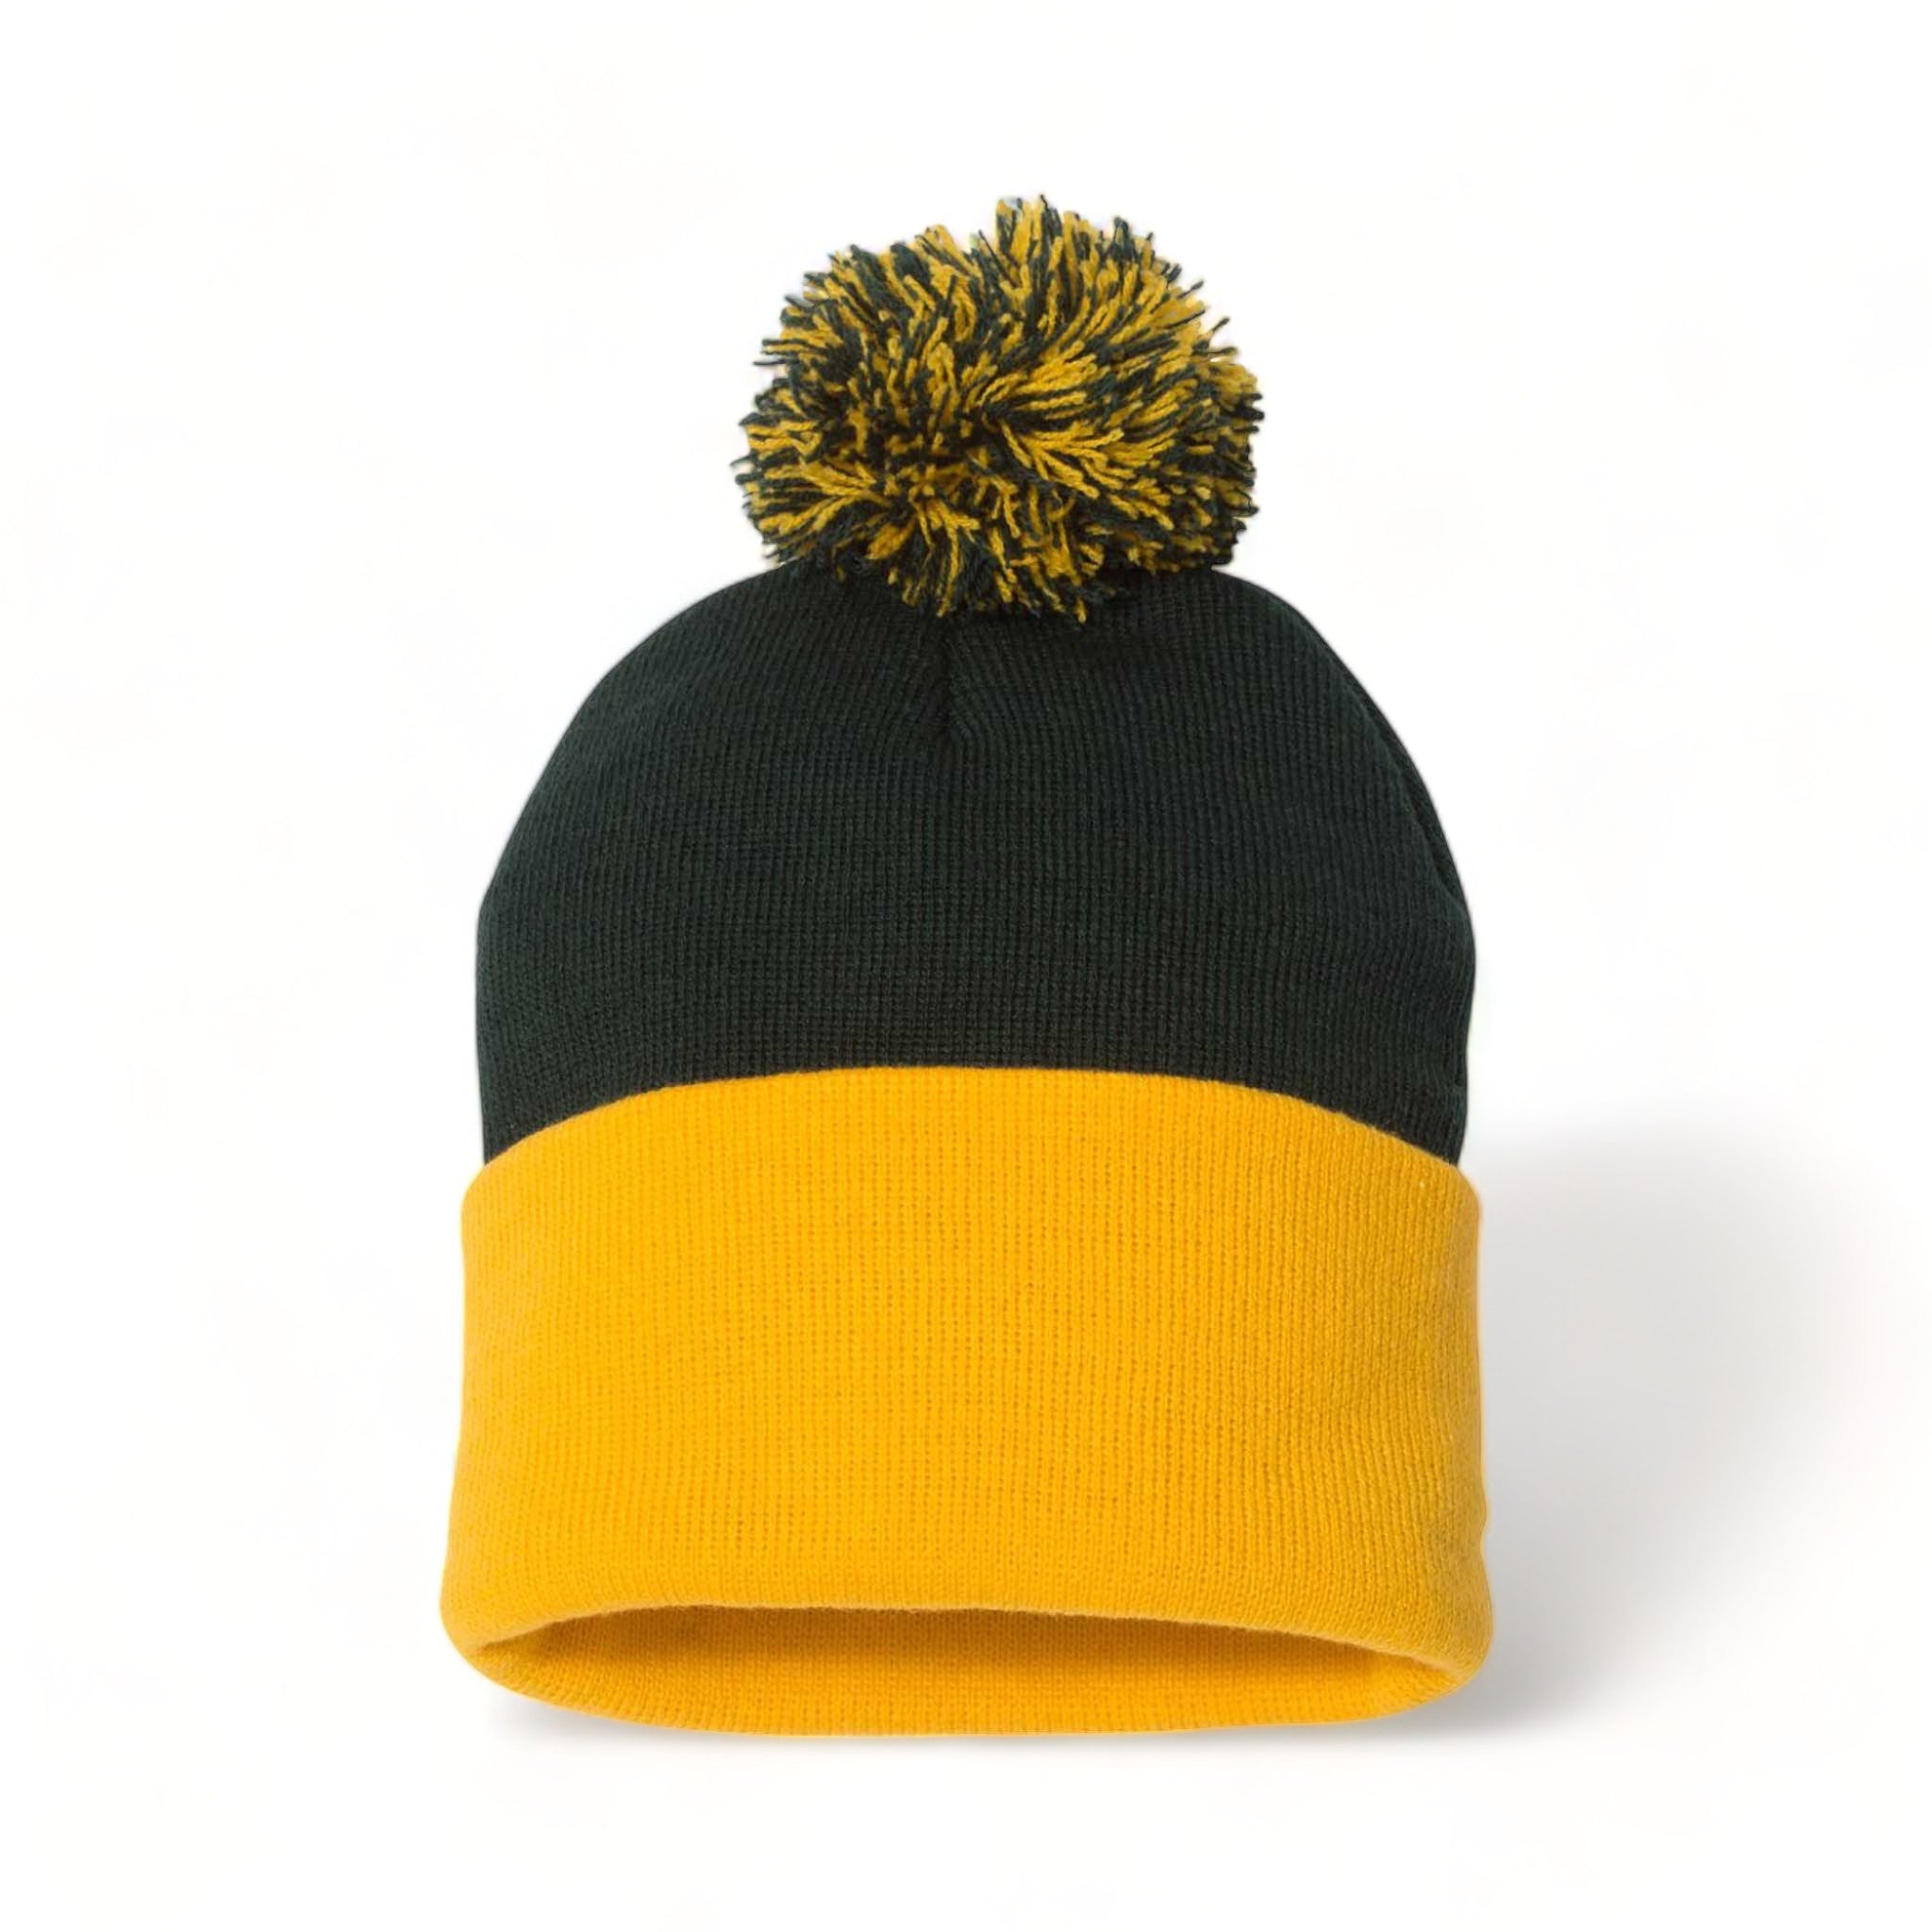 Sportsman SP15 custom beanie in forest and gold